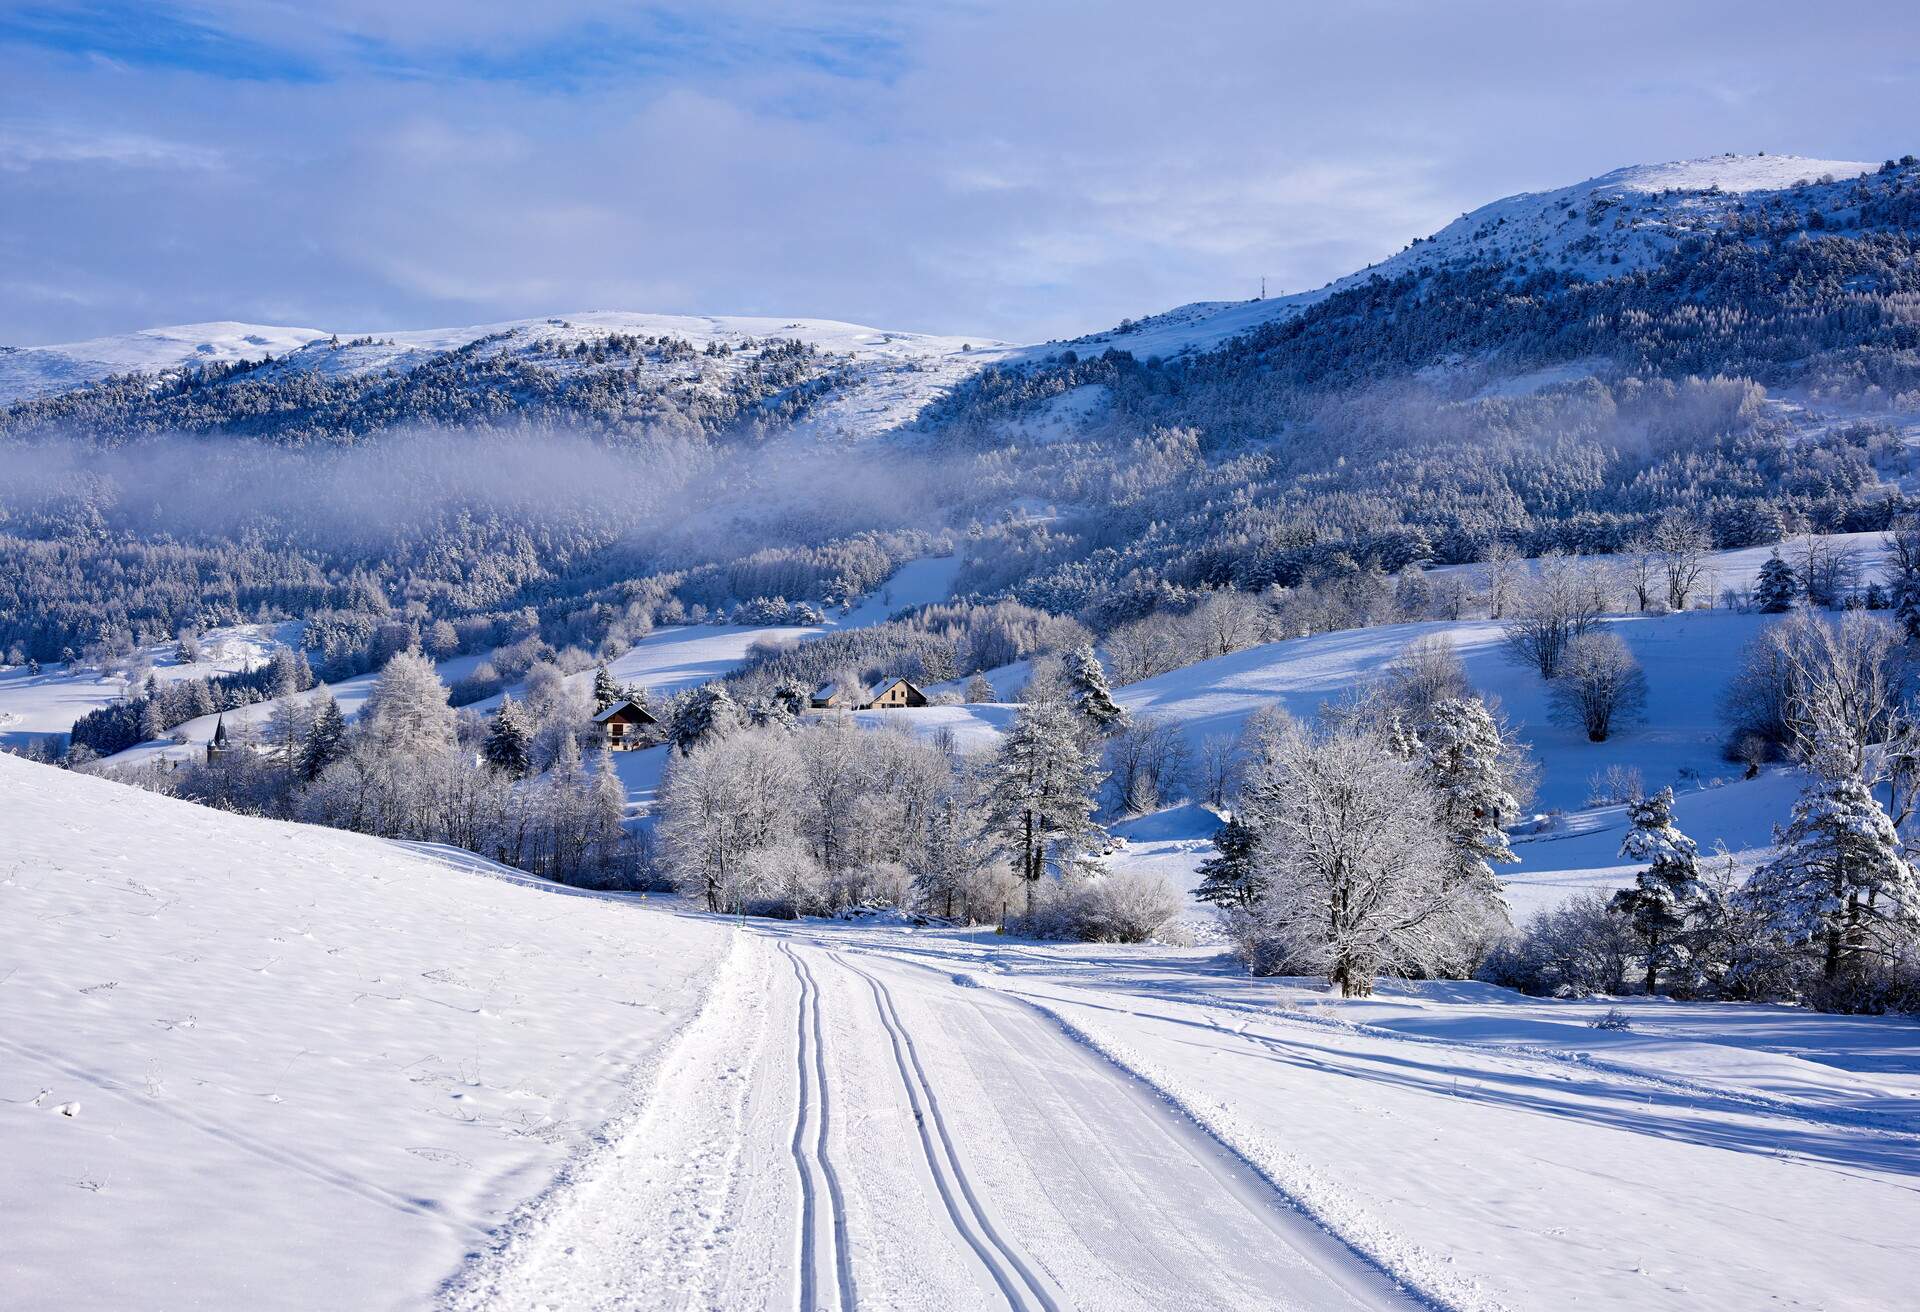 scenic view of fresh snow amidst mountains.Vercors, france, january 04,2020